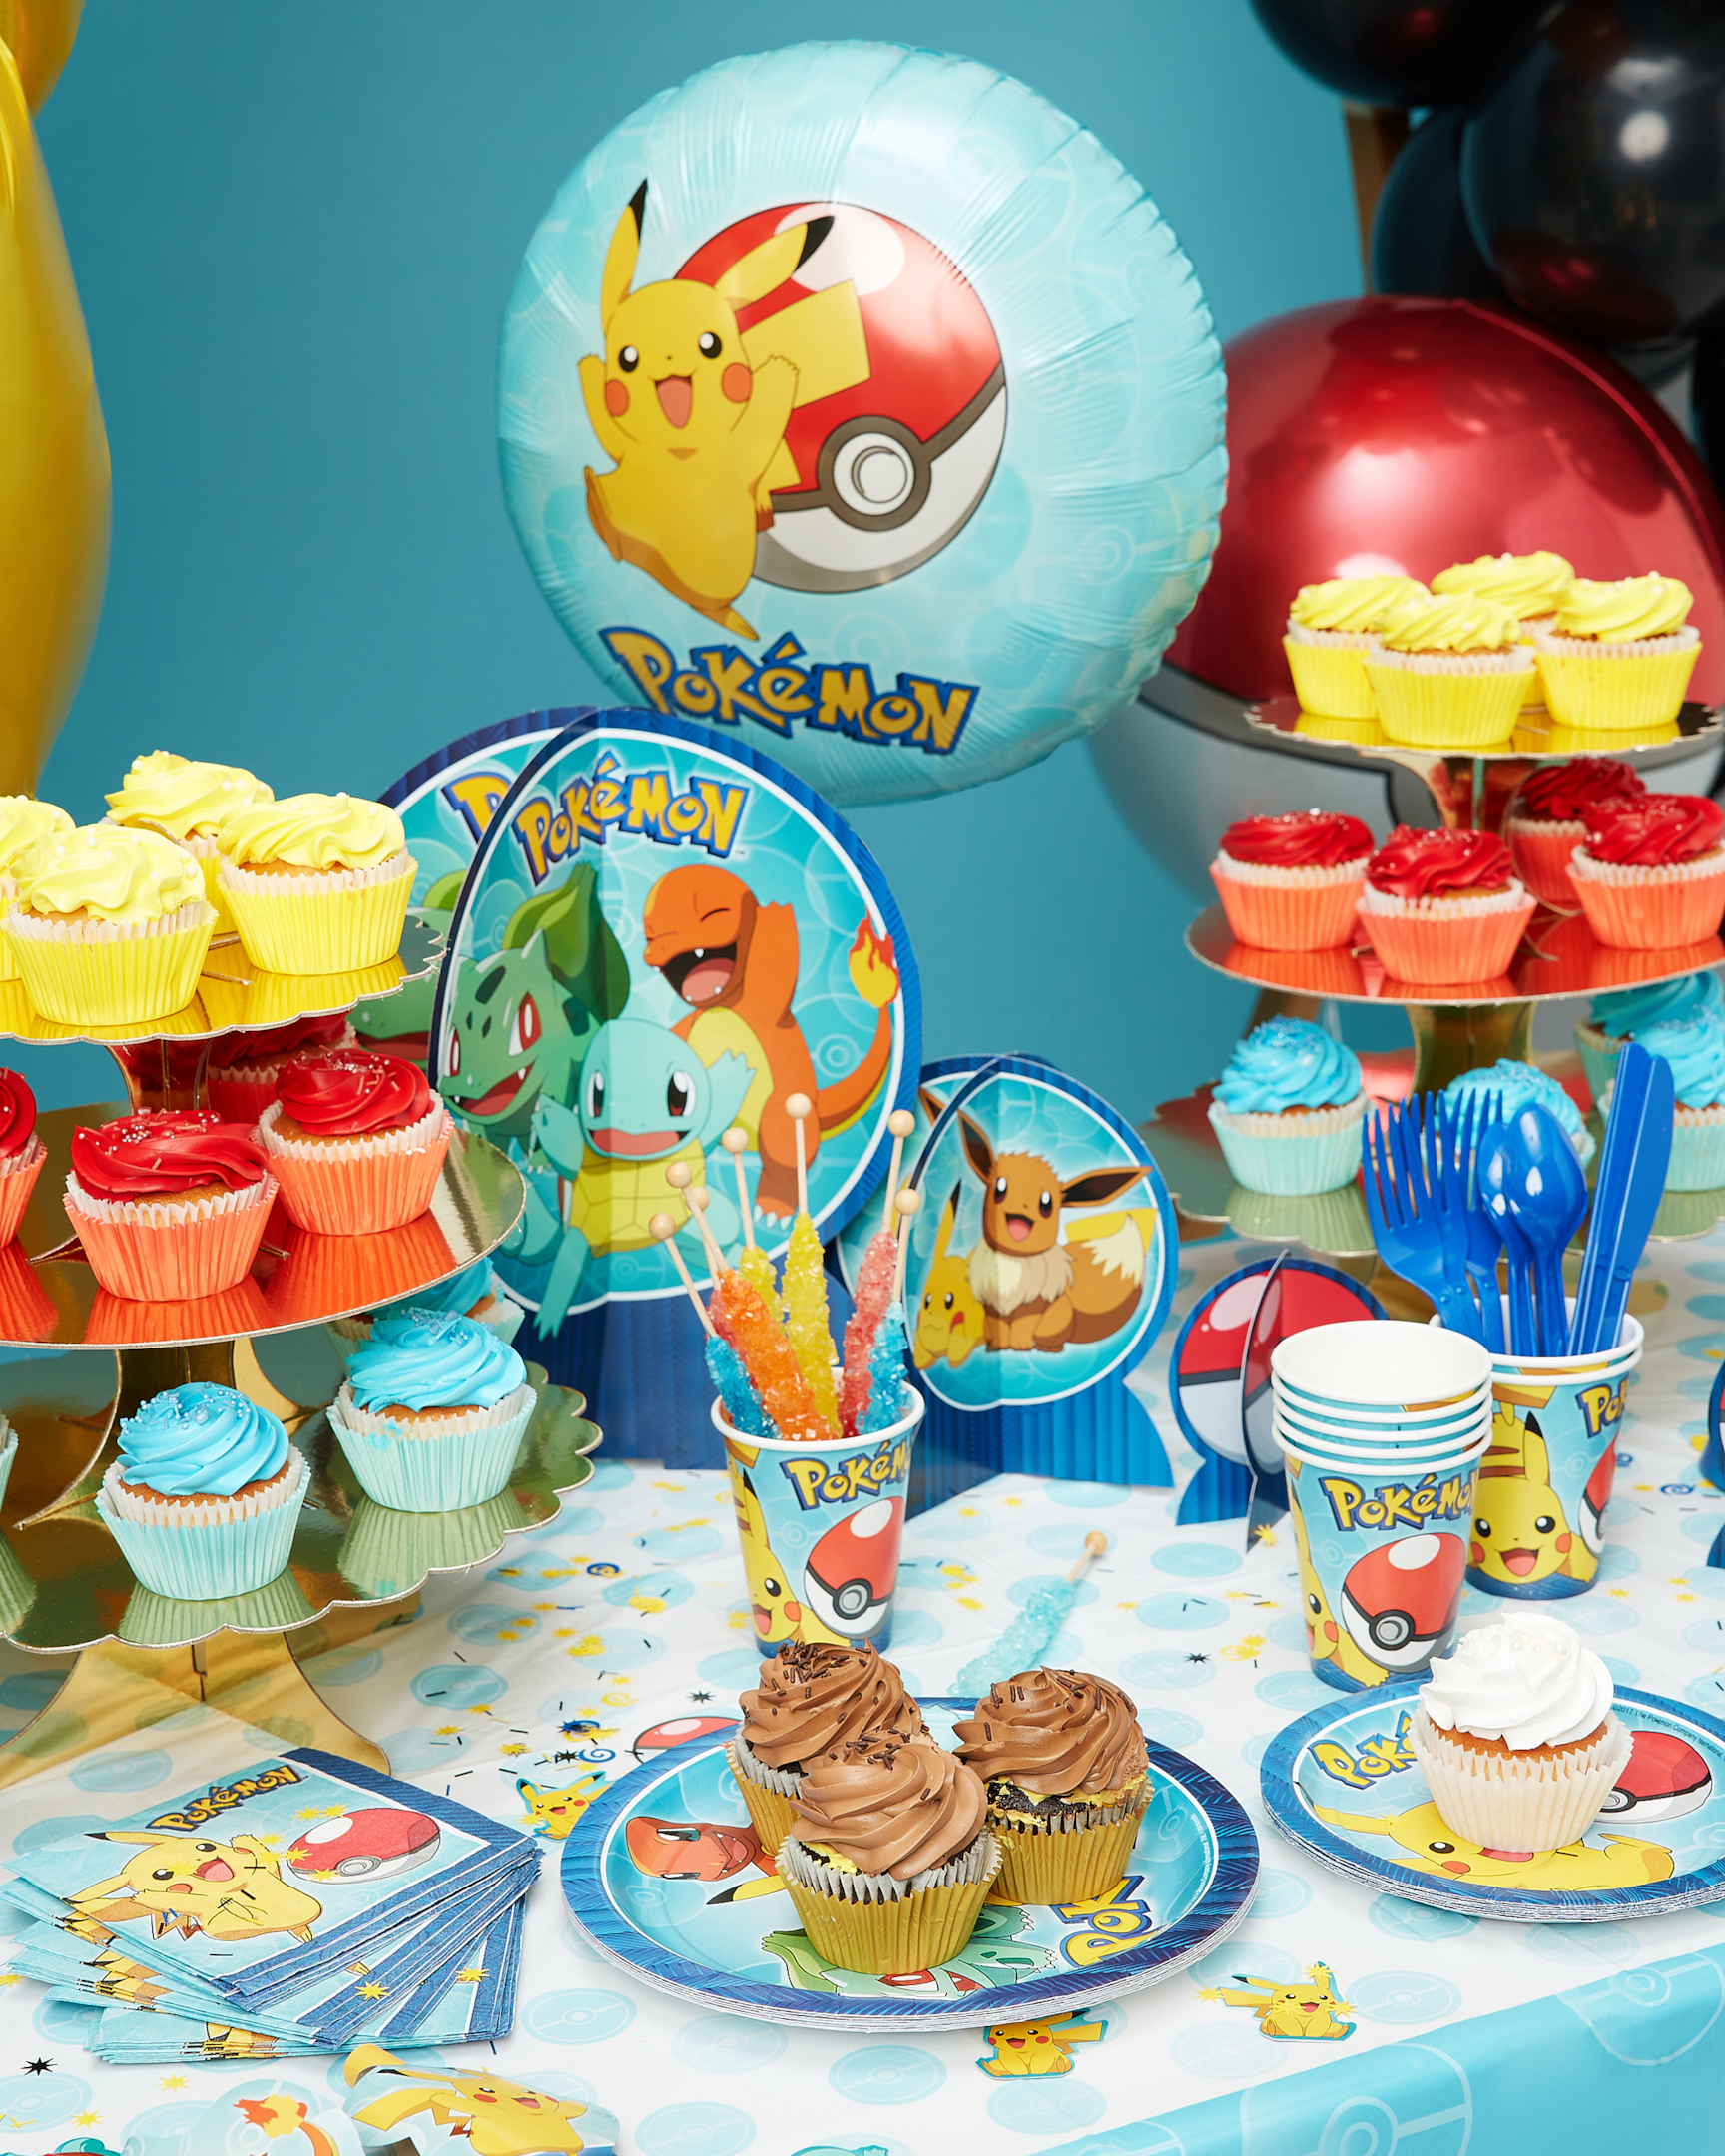 Pokémon party supplies and foil balloons.